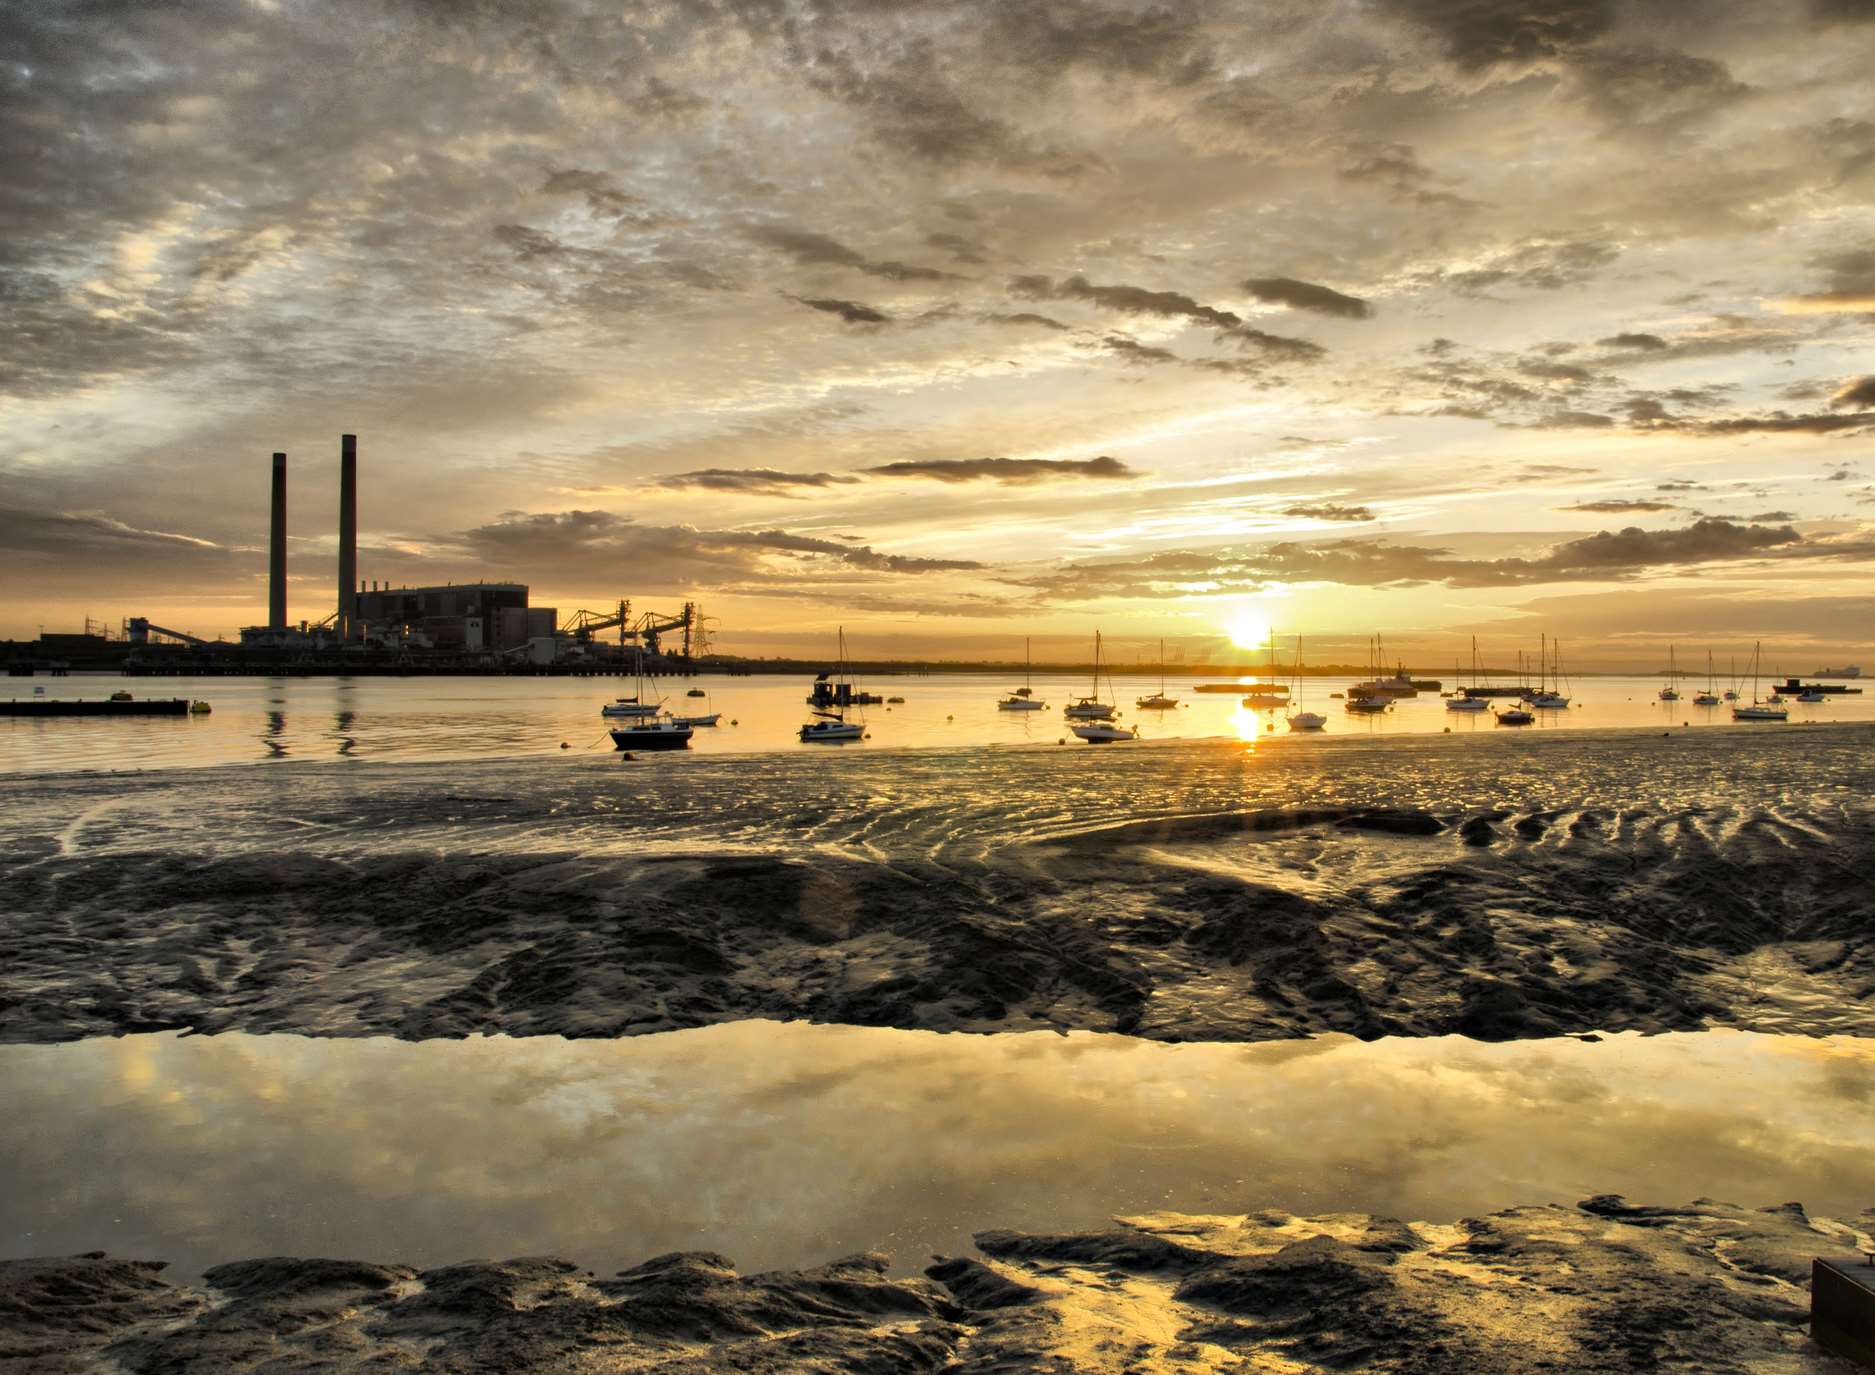 A beautiful sunrise over the River Thames at Gravesend